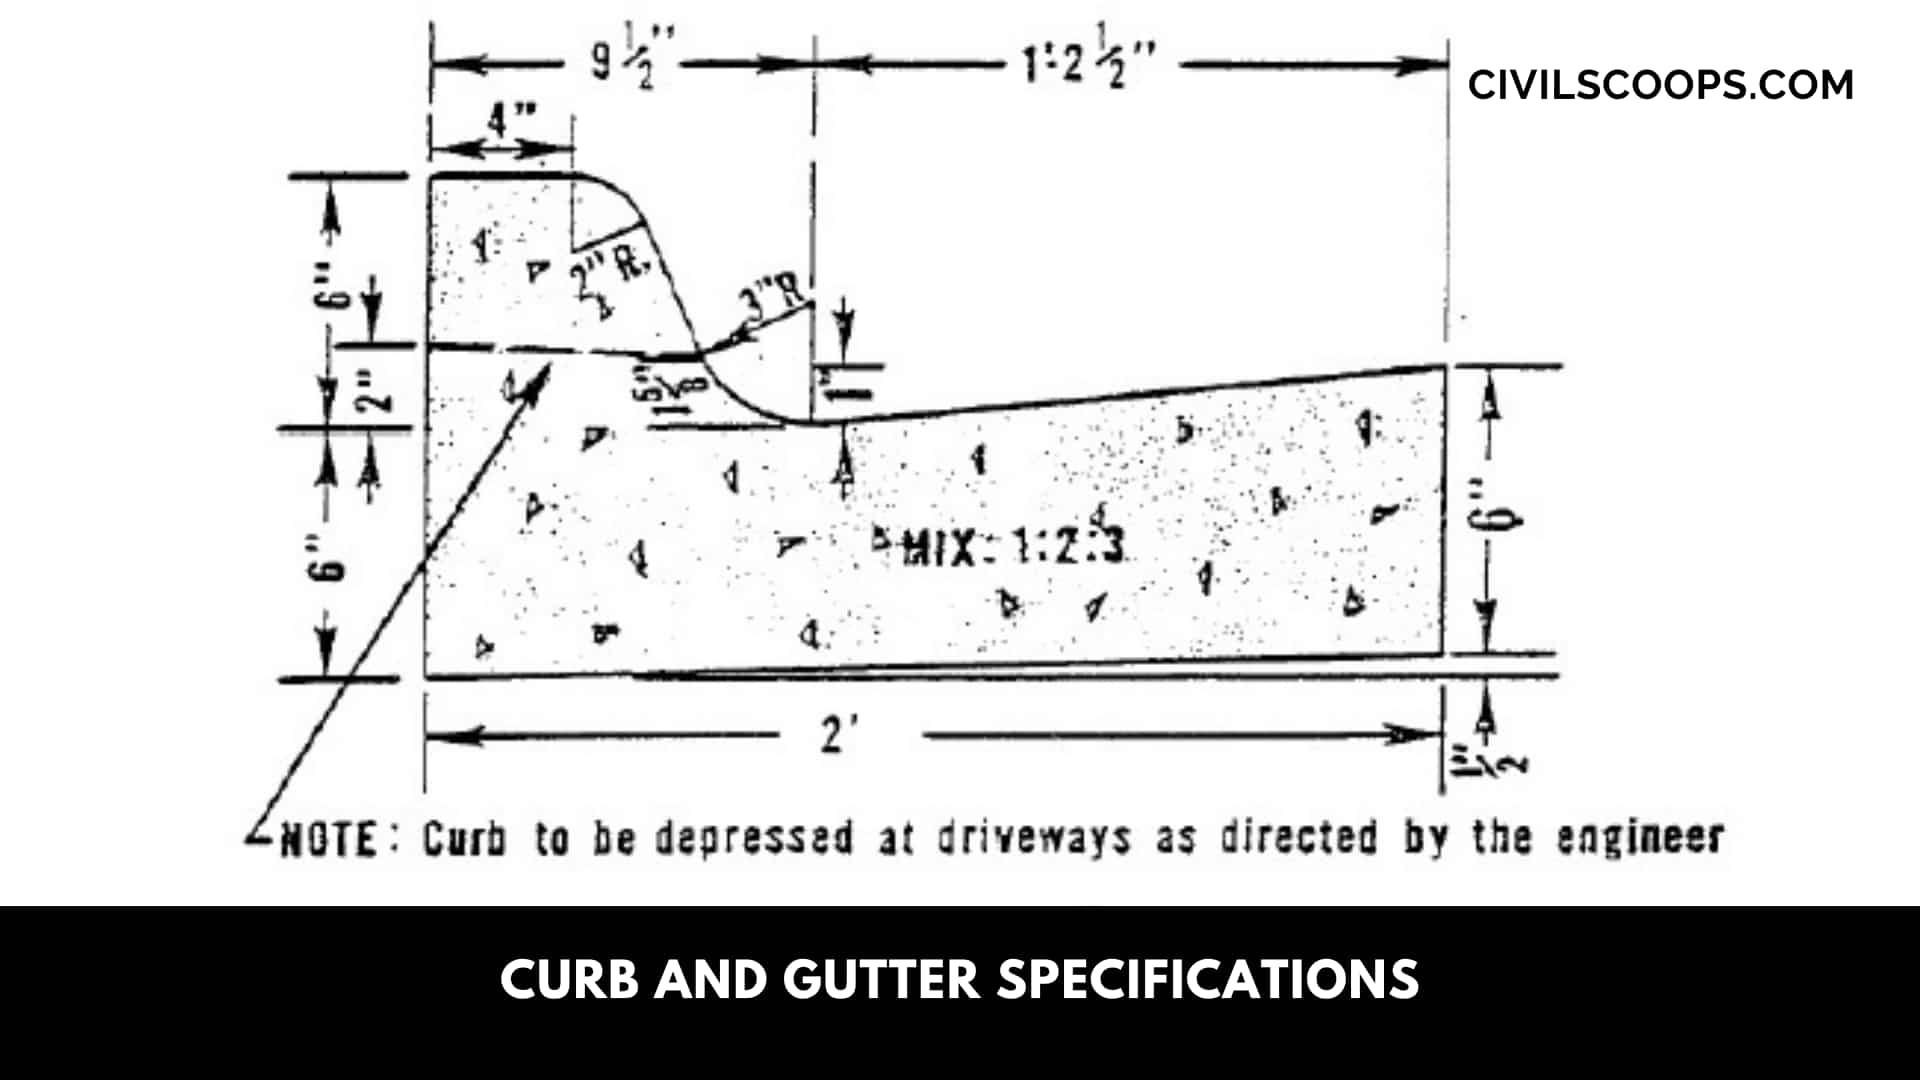 Curb and Gutter Specifications